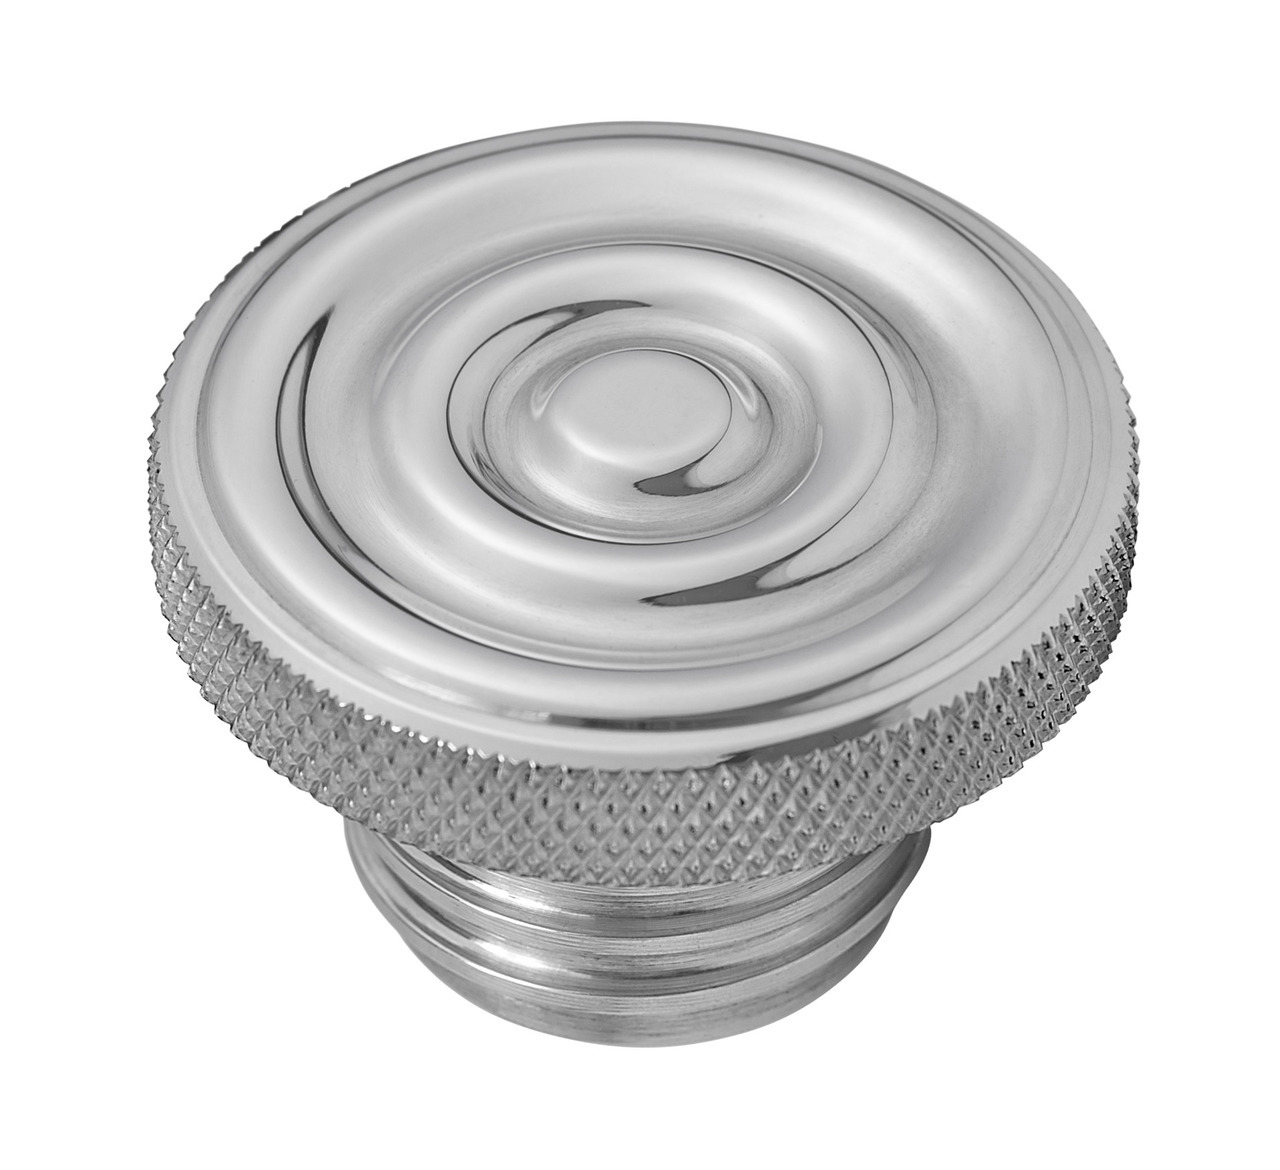 GAS CAP - RIPPLED TOP - VENTED: NXS002